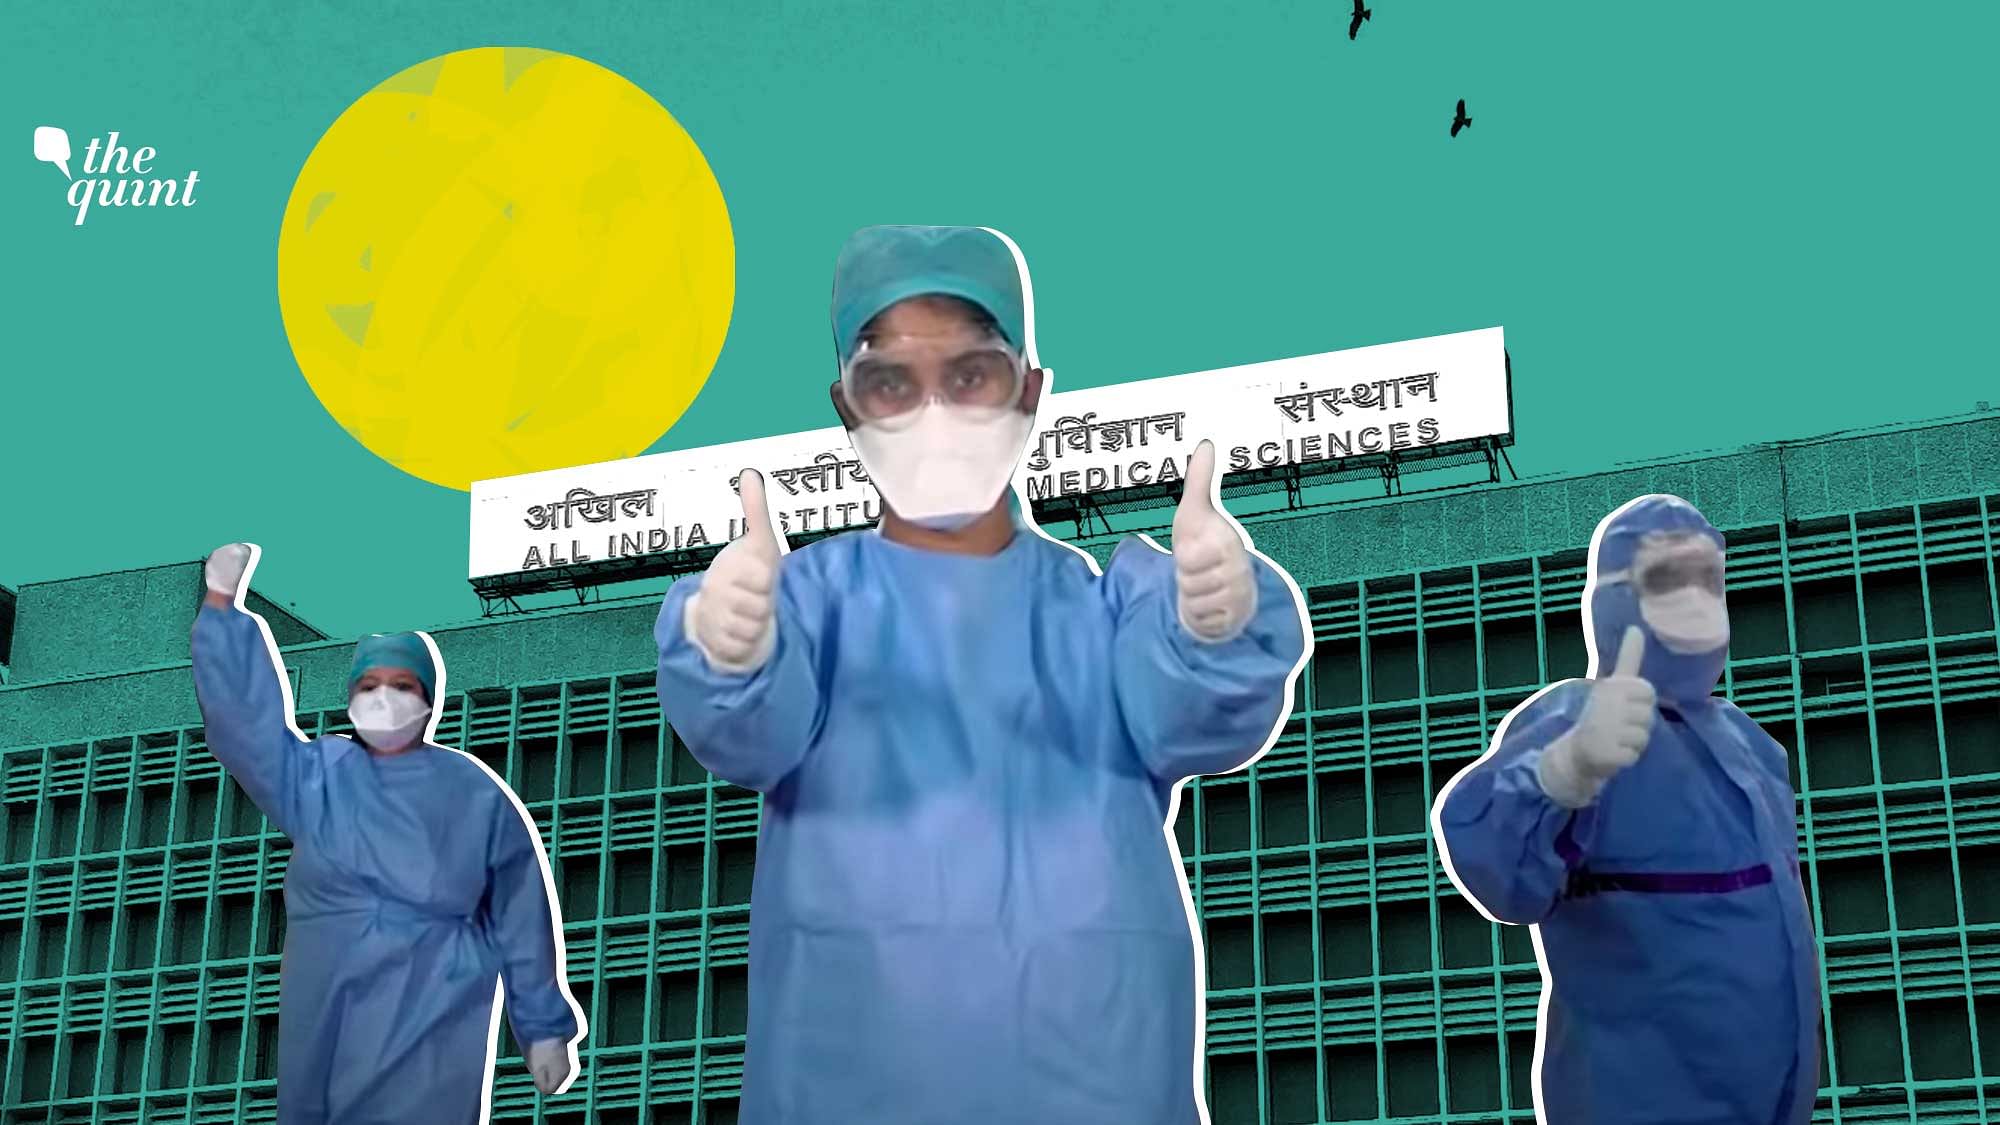 The doctors of AIIMS Delhi have made a special tribute to COVID-19 healthcare workers.